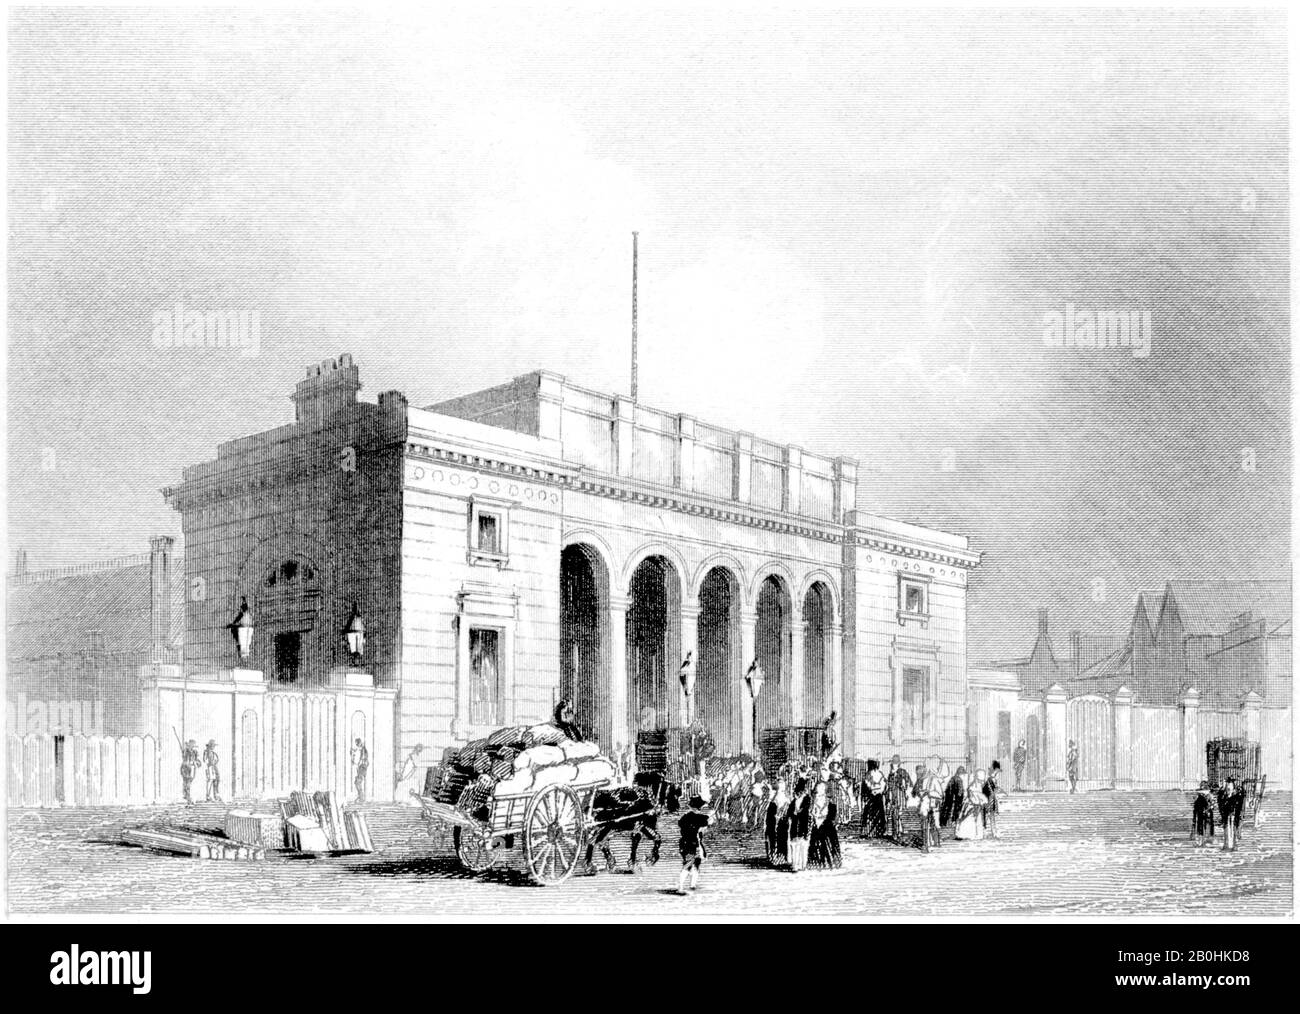 An engraving of the South Western Railway Station Nine Elms, London scanned at high resolution from a book printed in 1851.Believed copyright free. Stock Photo